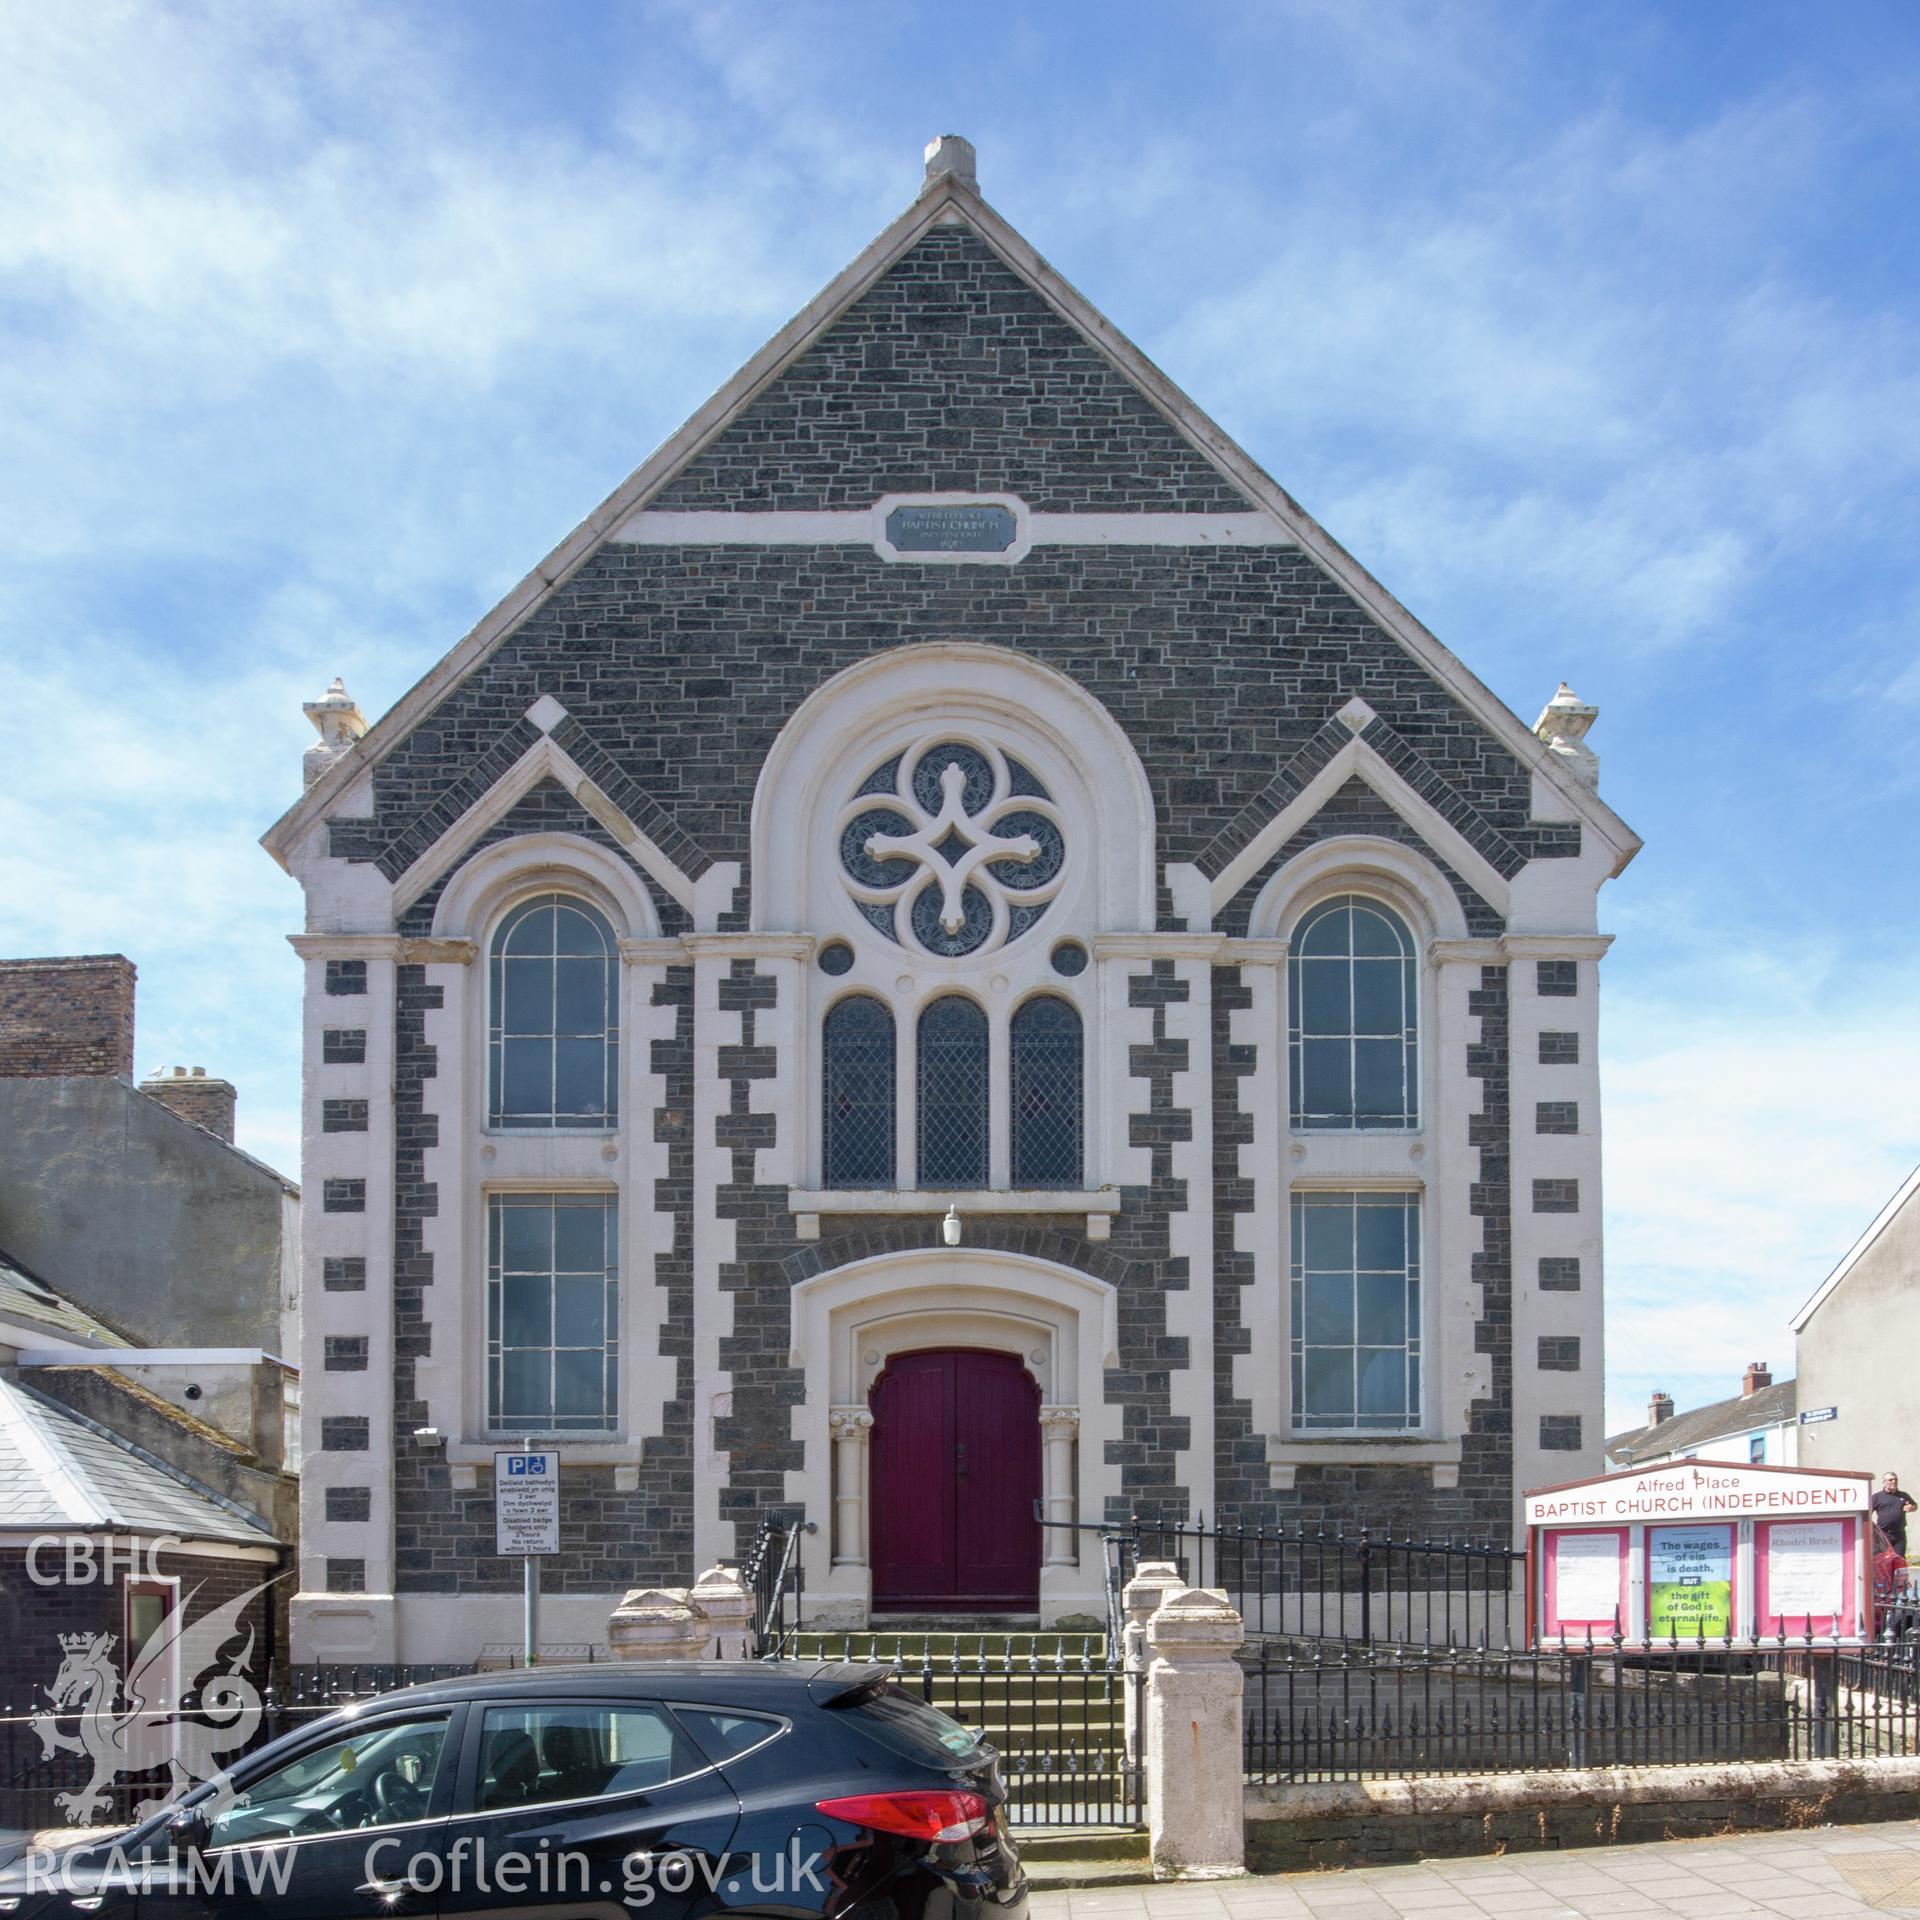 Colour photograph showing front elevation and entrance of the English Baptist Church at Alfred Place, Aberystwyth. Photographed by Richard Barrett on 25th June 2018.